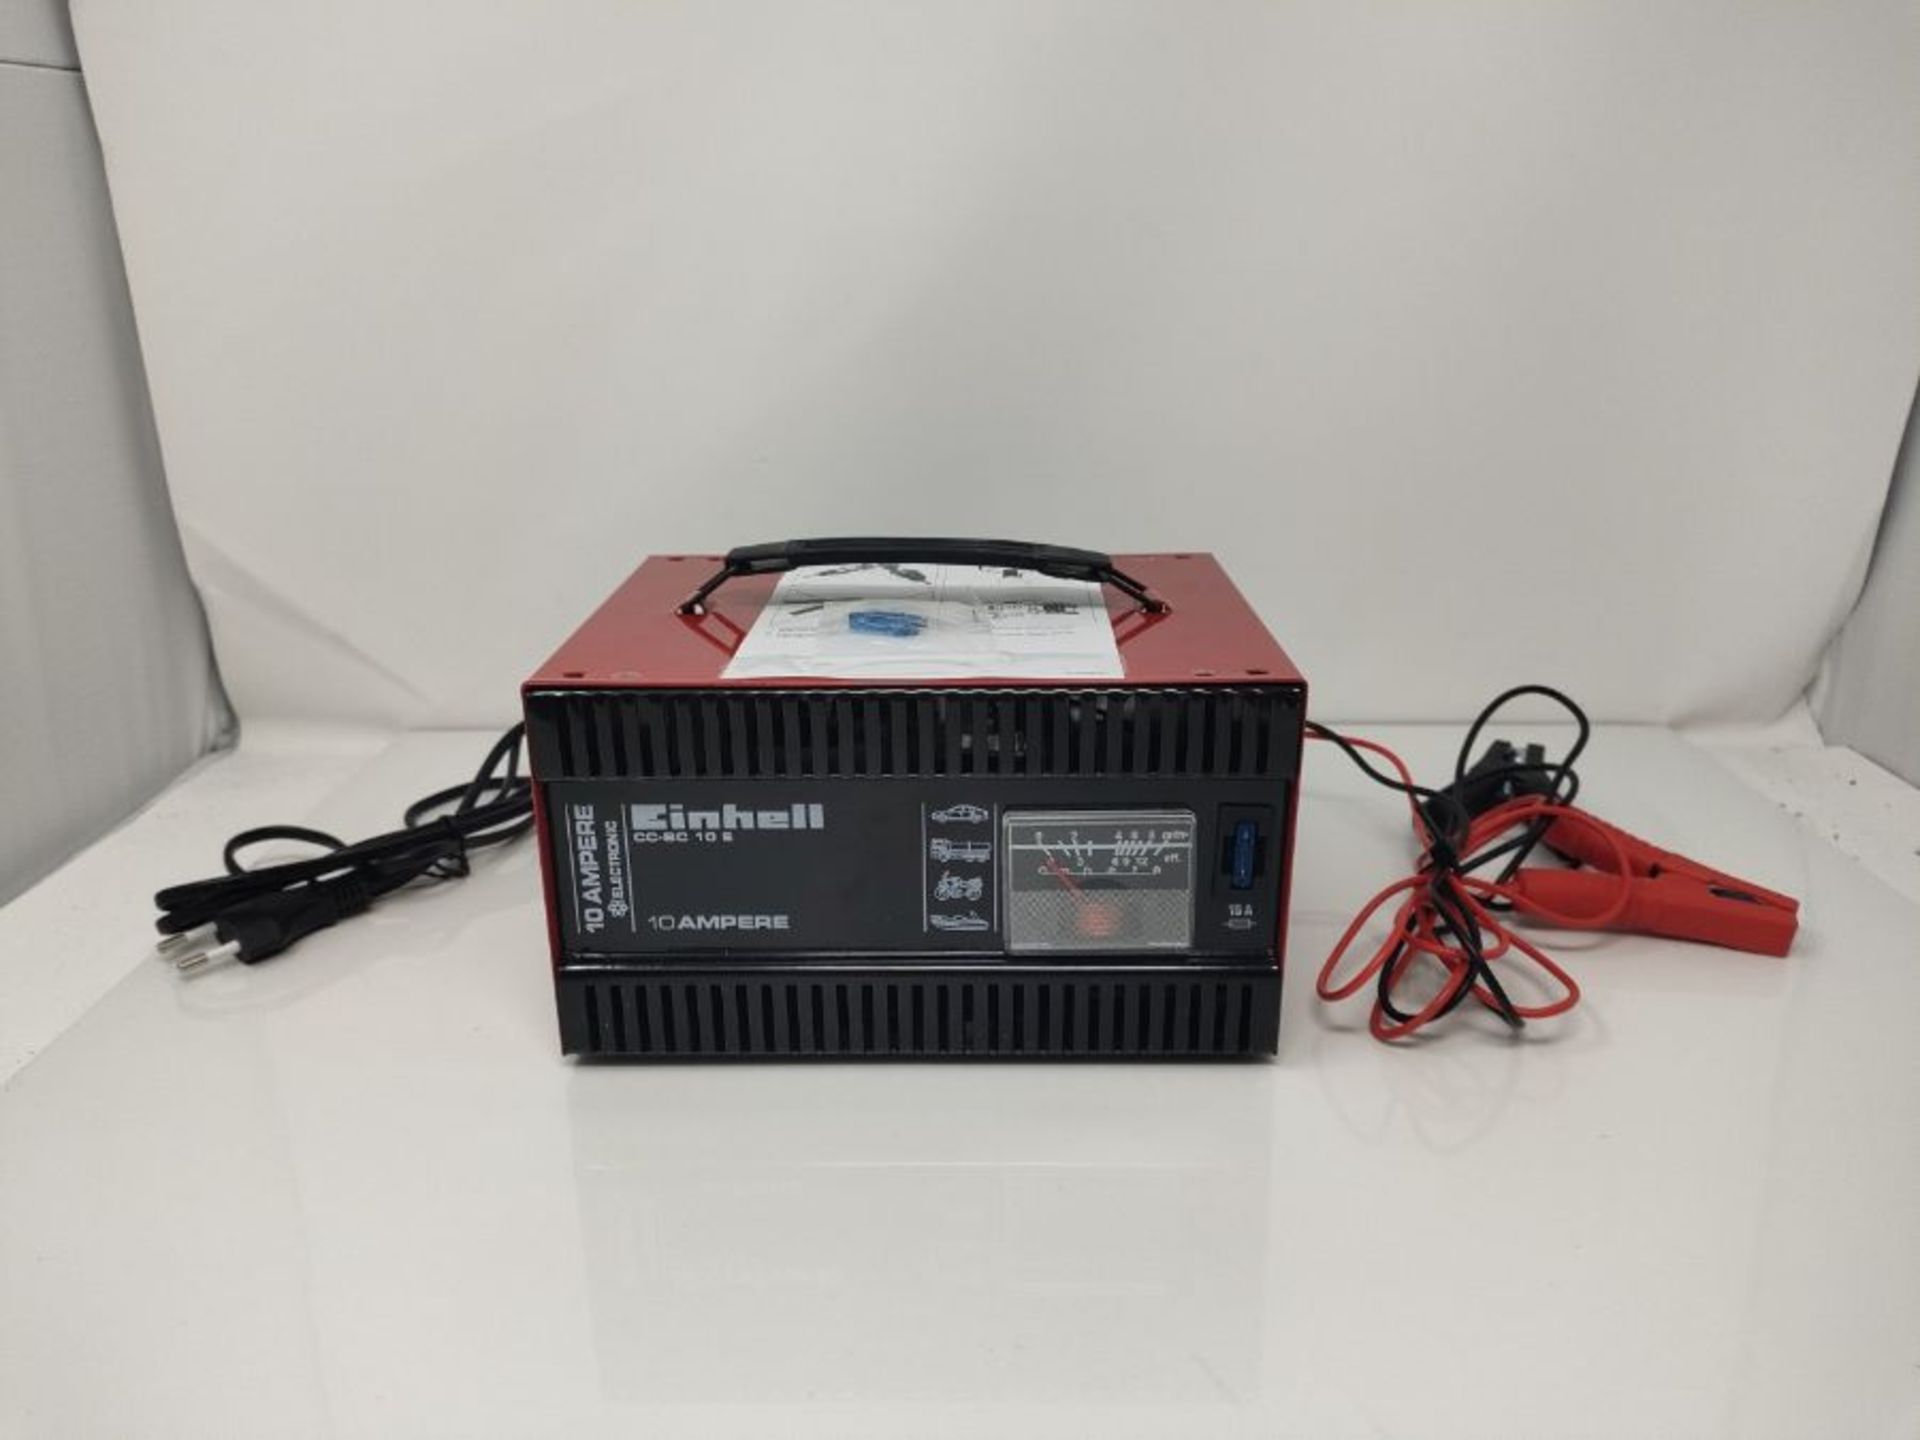 Einhell Battery Charger CC-BC 10 E (for Batteries from 5 to 200 Ah, 12 V Charging V - Image 3 of 3